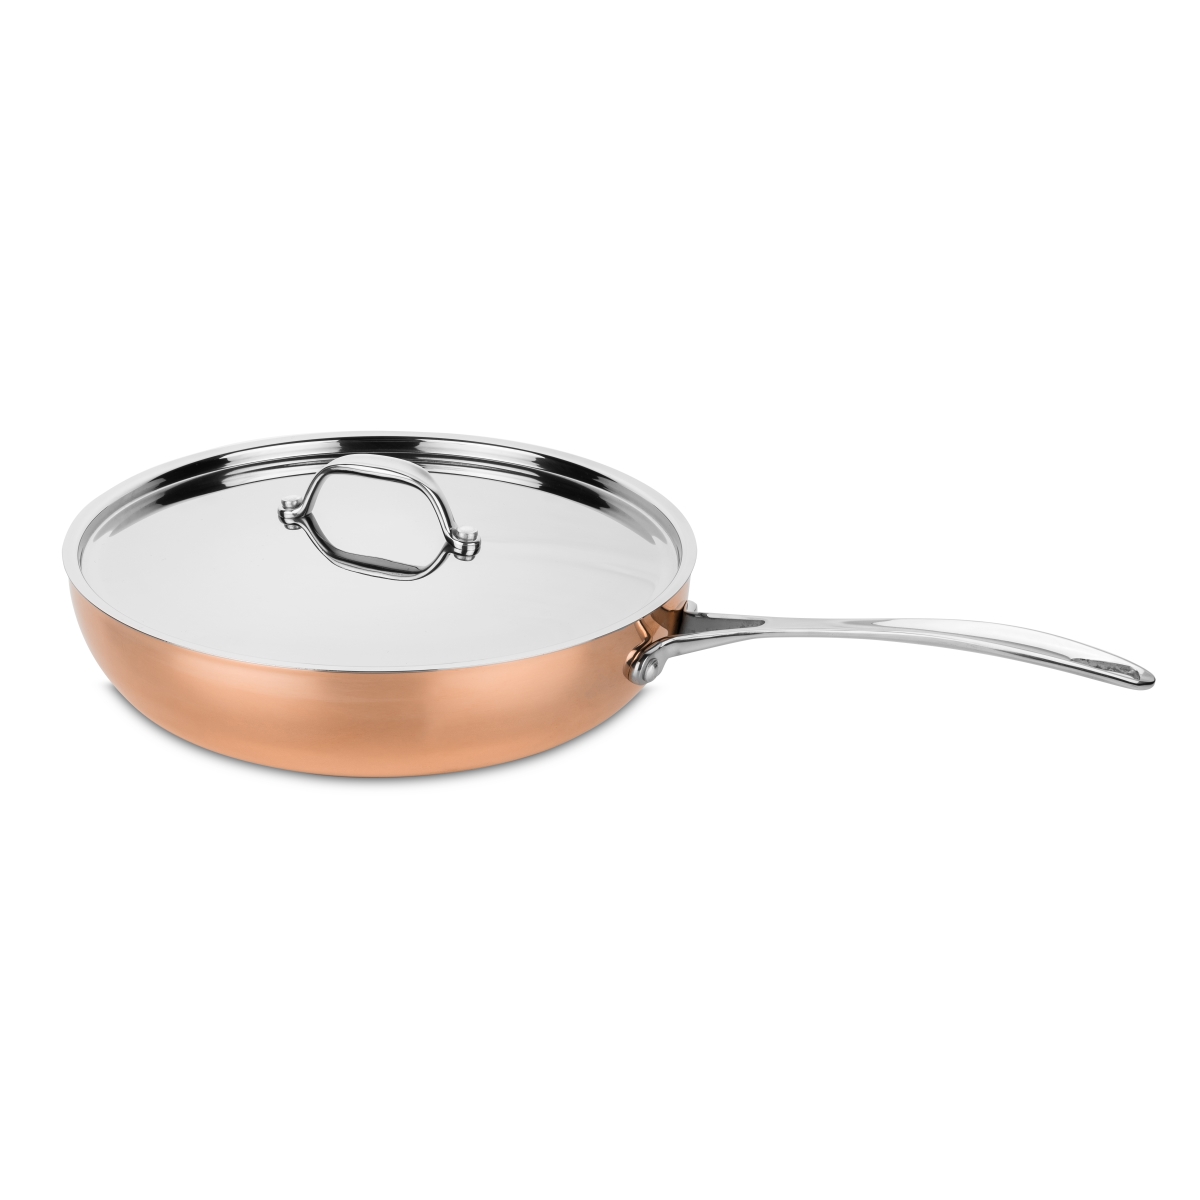 30124126c 26 Cm Toscana Frying Pan With Lid